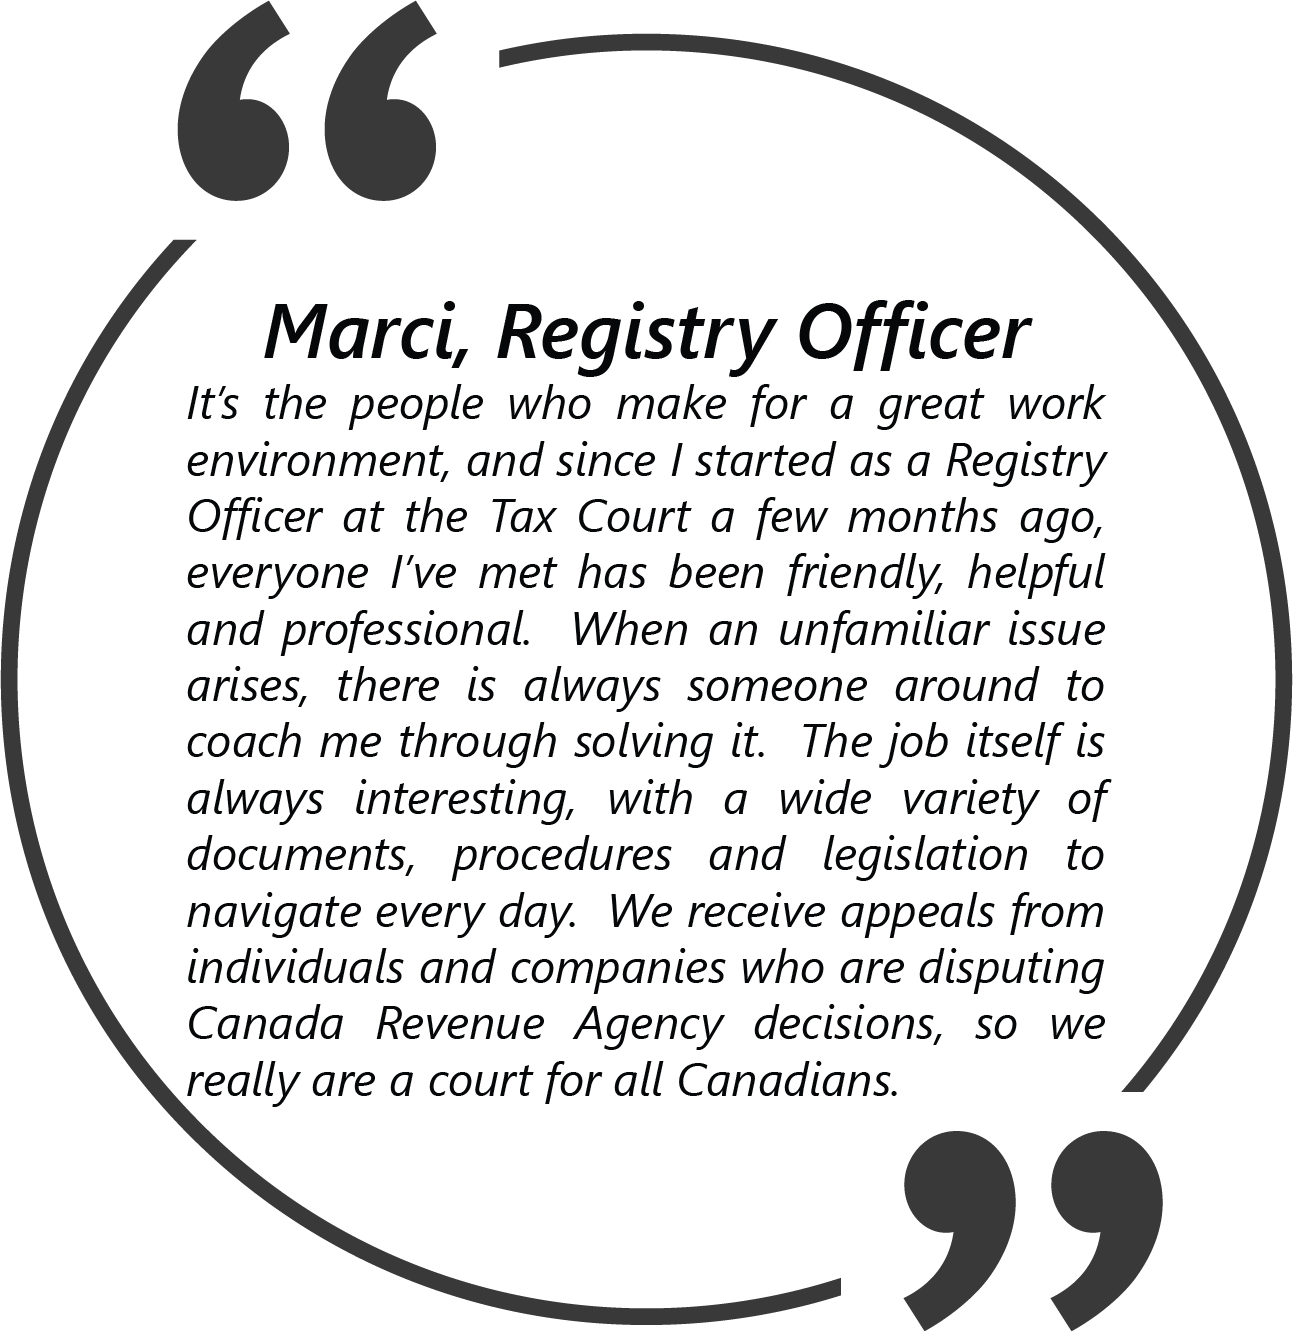 Quote from Marci, Registry Officer